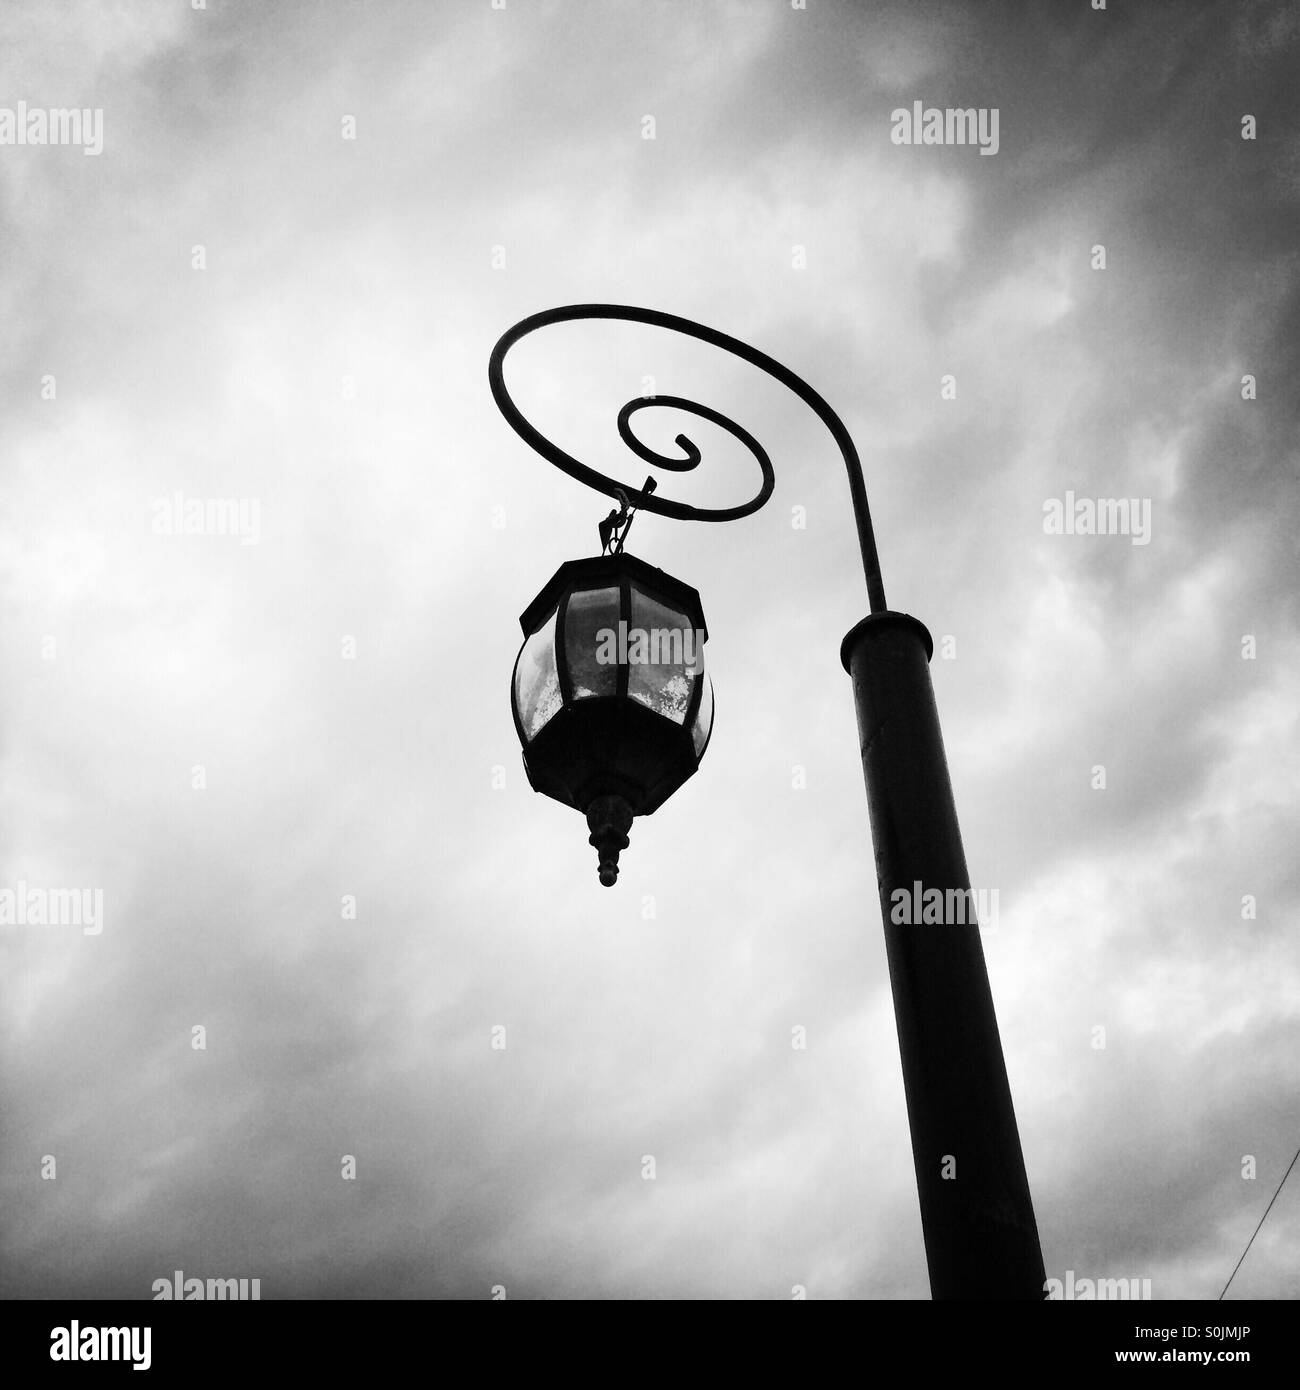 Street lamp post with clouds in the background in black and white. Stock Photo